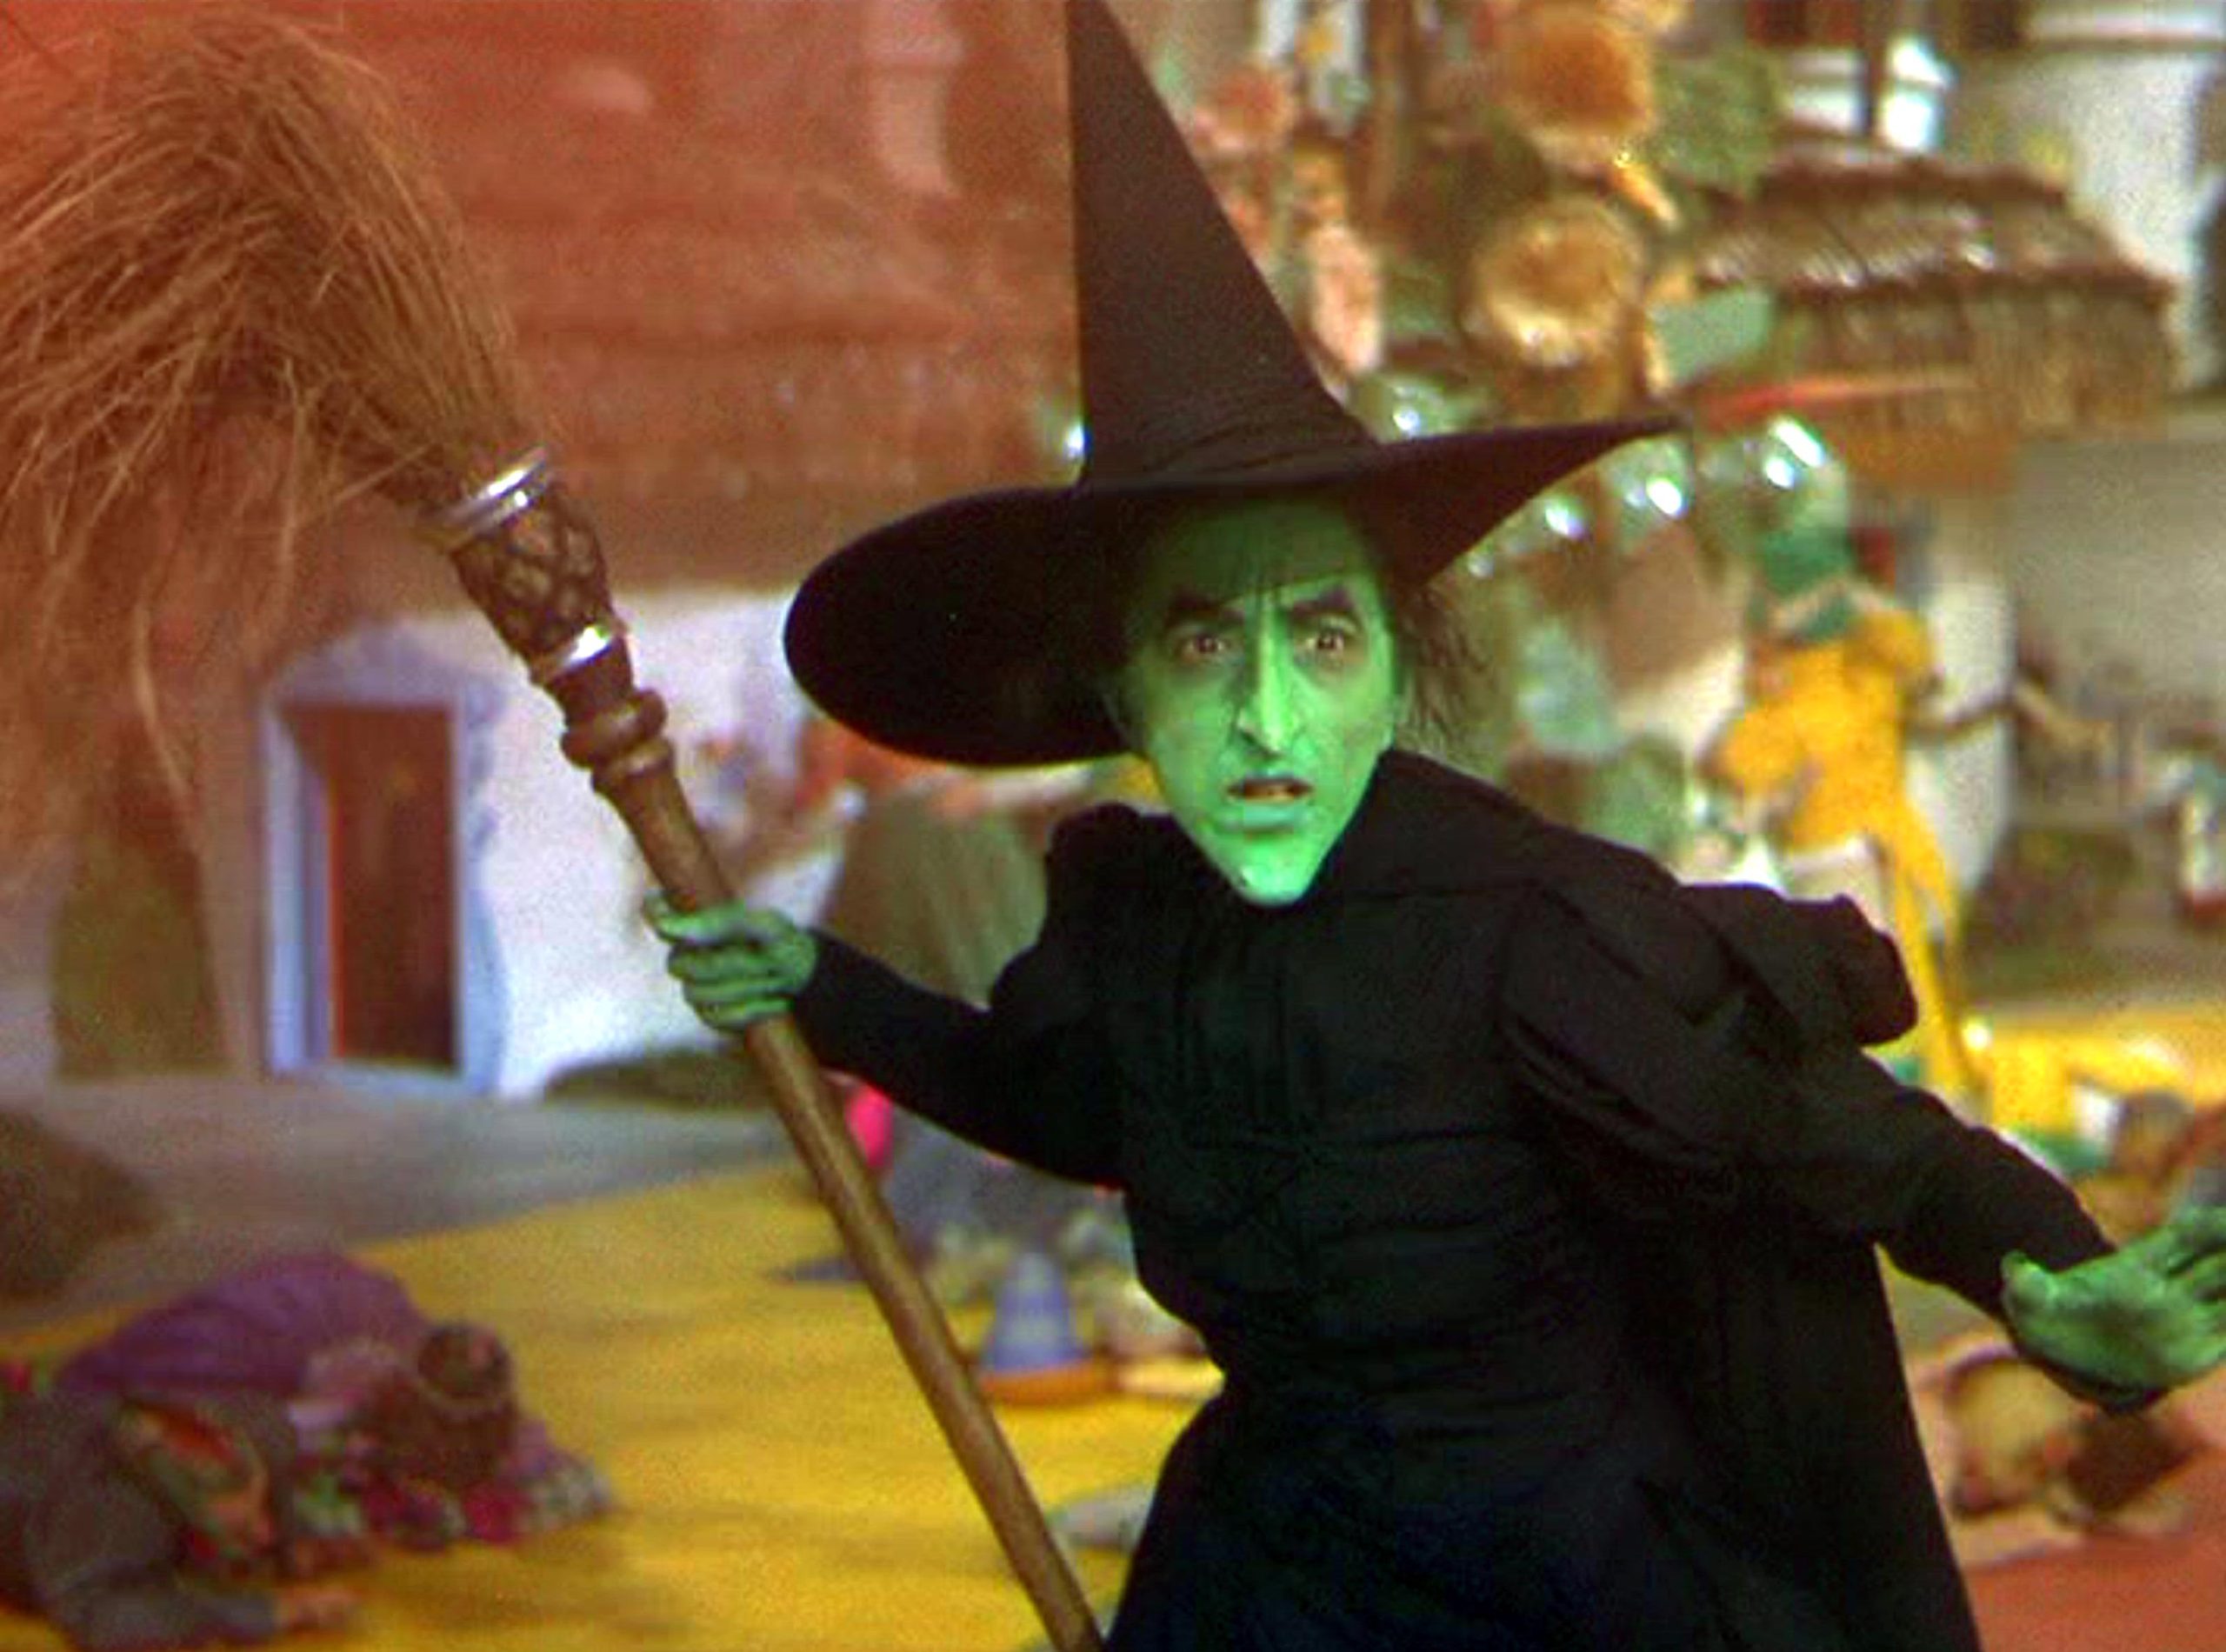 The Wicked Witch of the West from The Wizard of Oz stands on the yellow brick road, holding her broomstick.